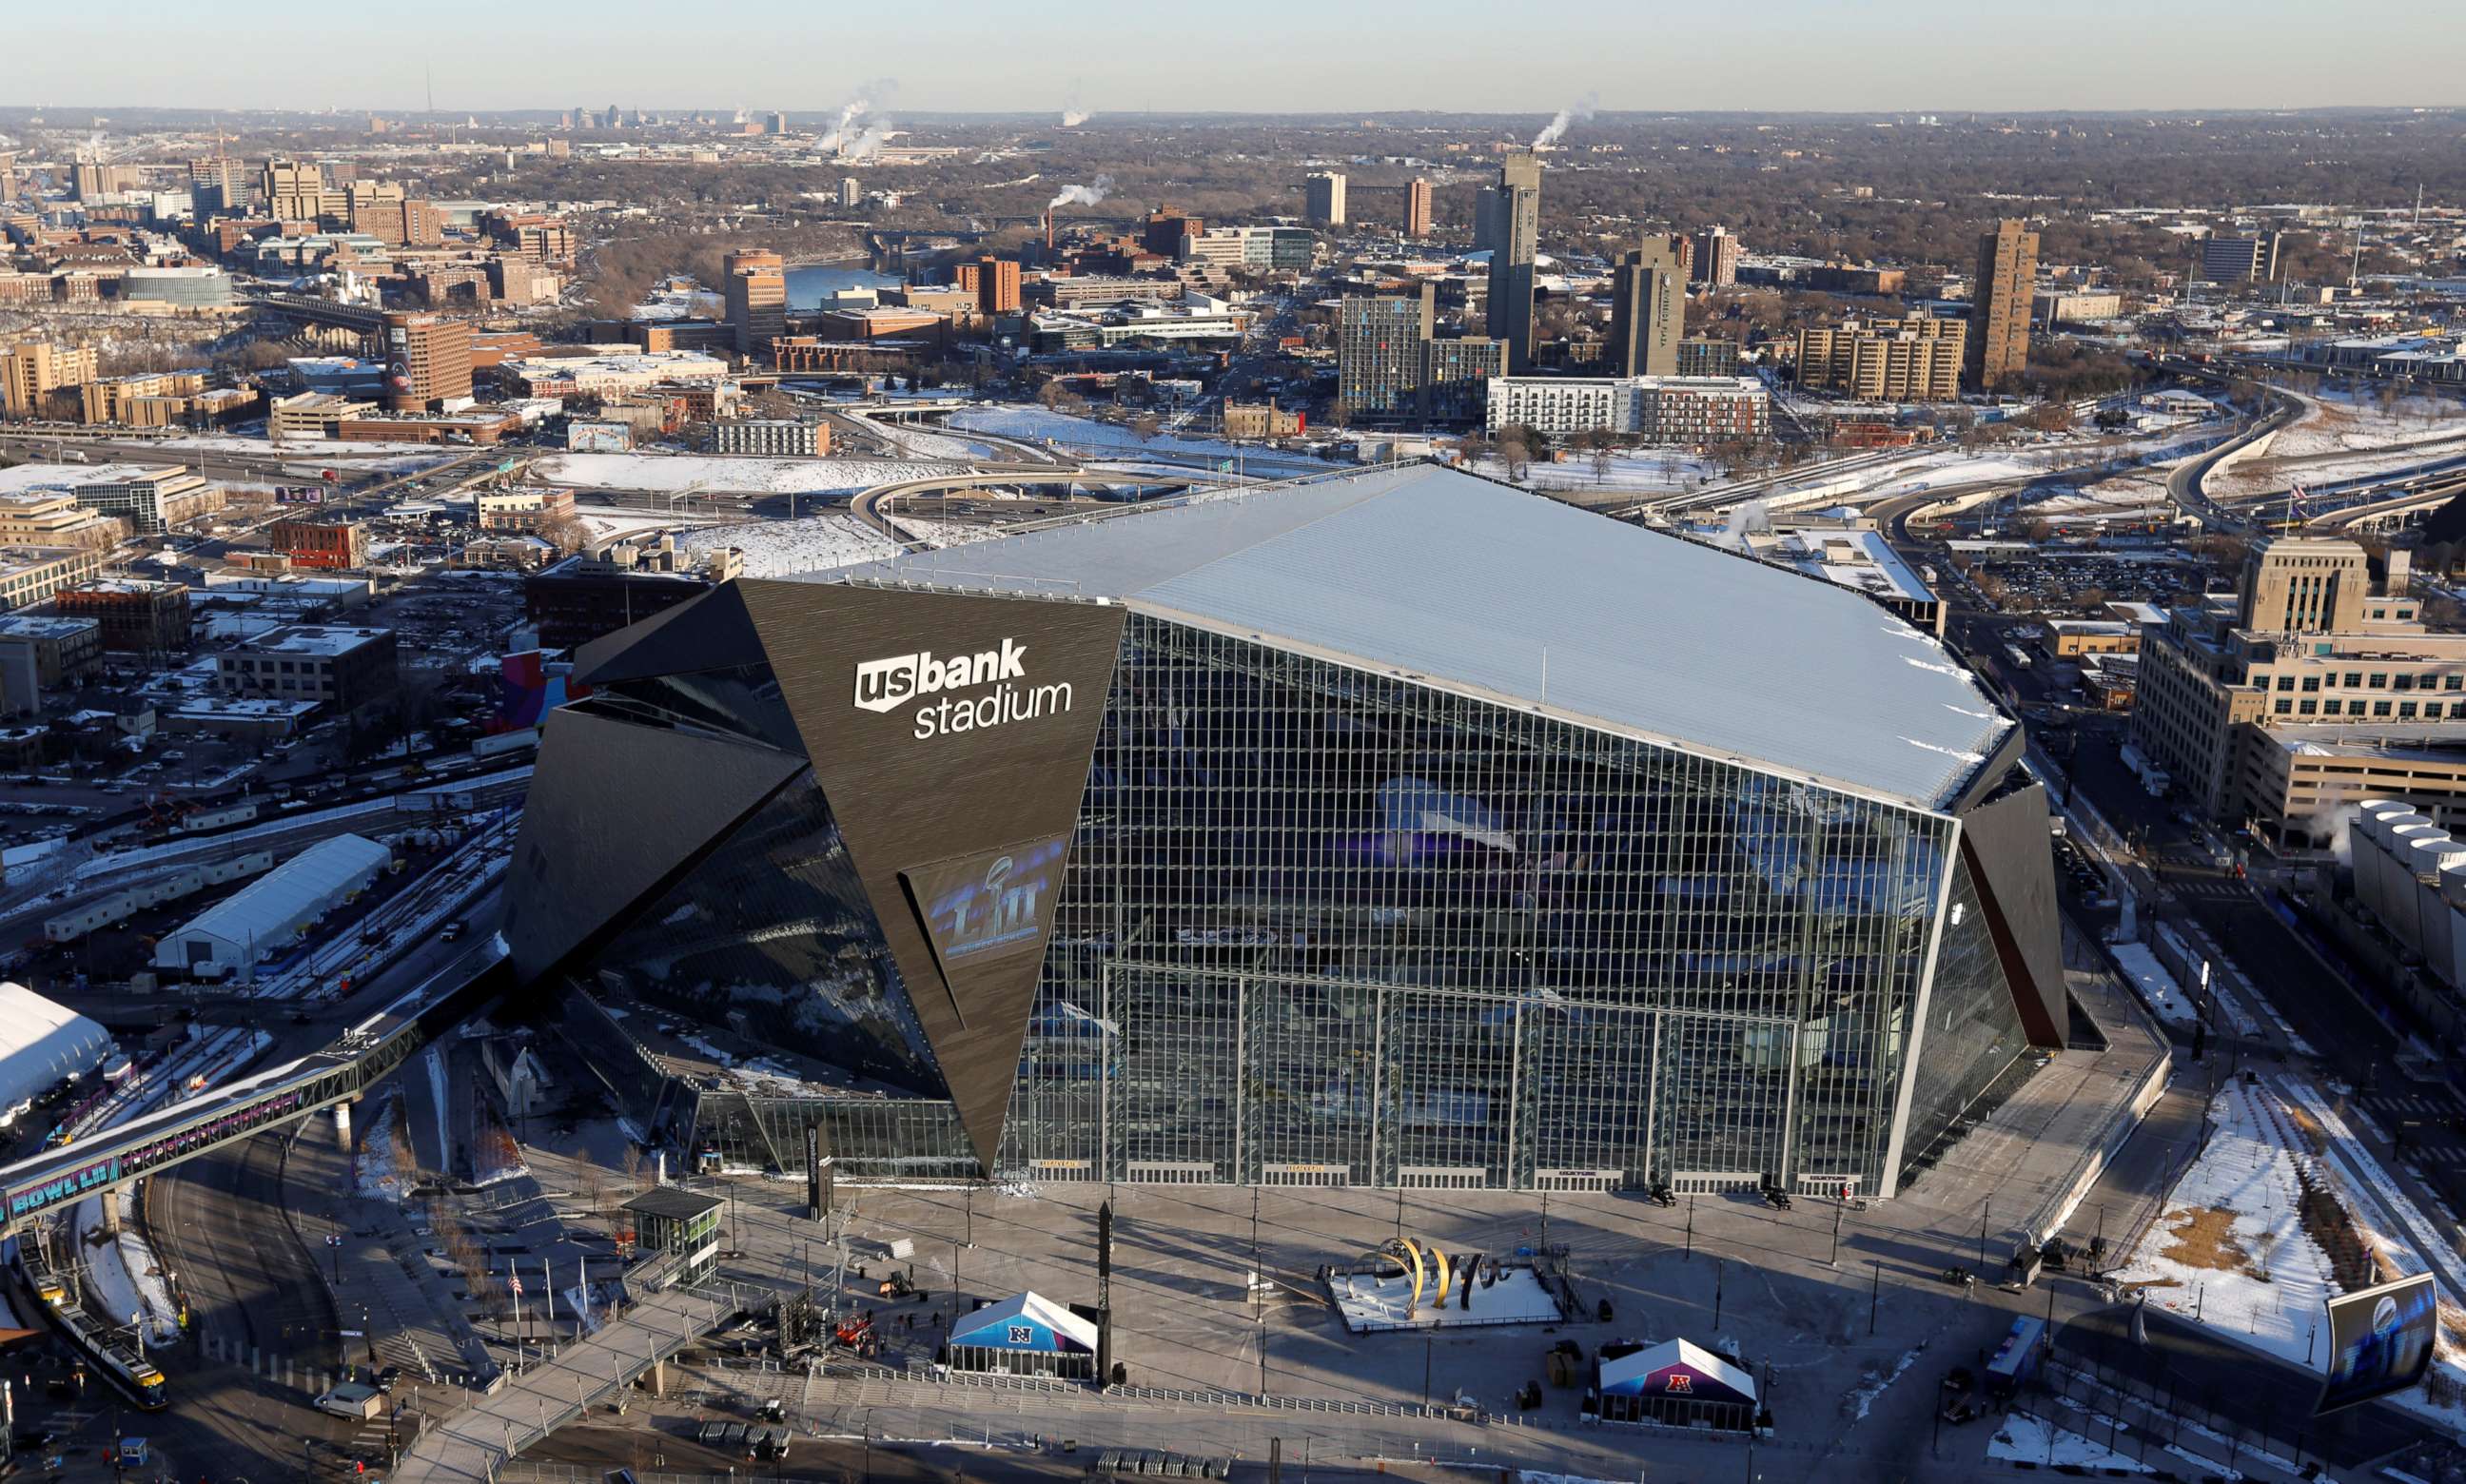 PHOTO: U.S. Bank Stadium, venue of this year's Super Bowl, as seen from a Department of Homeland Security Blackhawk helicopter that will be patrolling the skies during the game in Minneapolis, Minn., Jan. 29, 2018.  